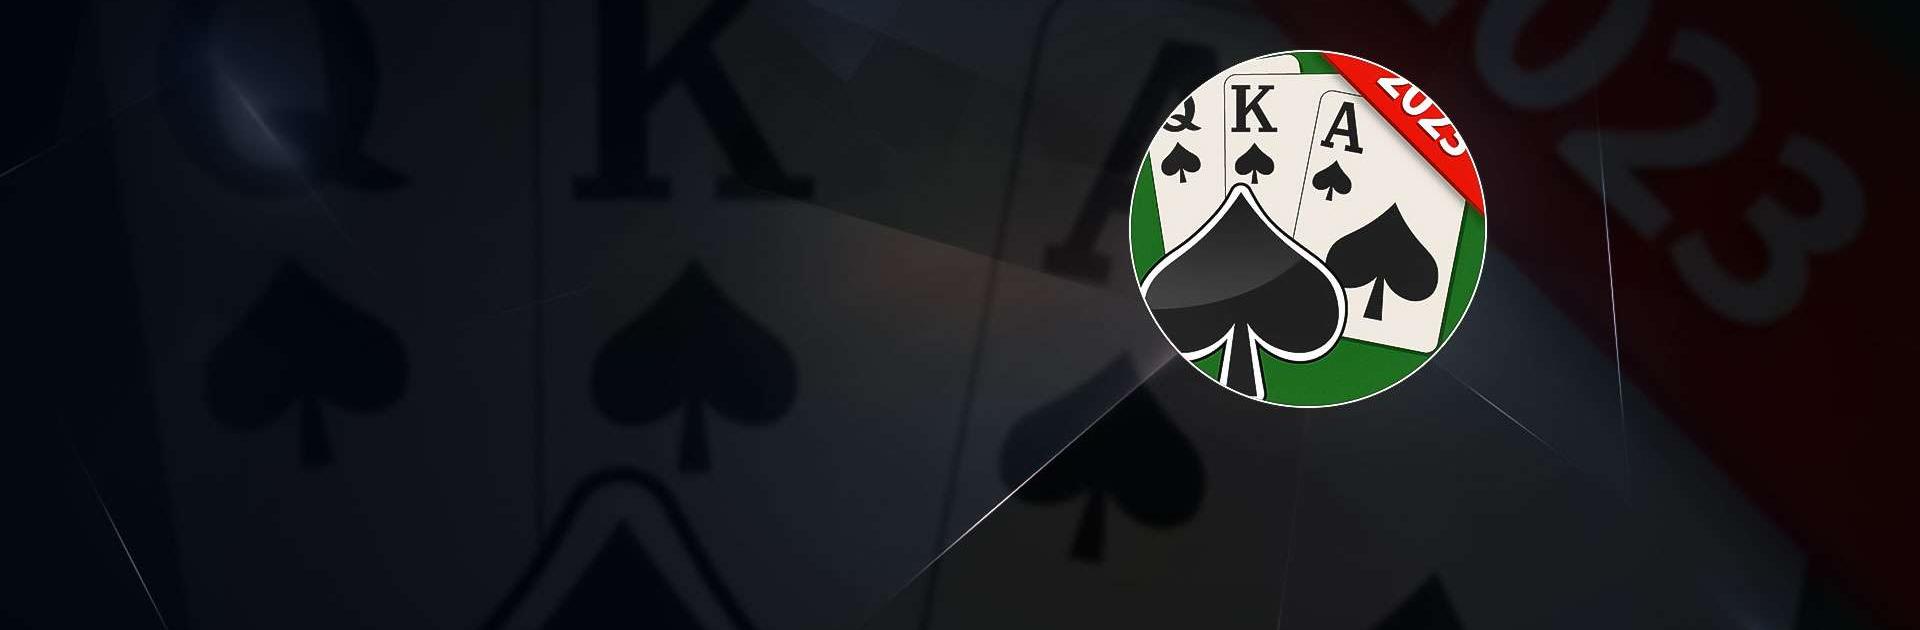 Play Spades: Classic Card Games Online